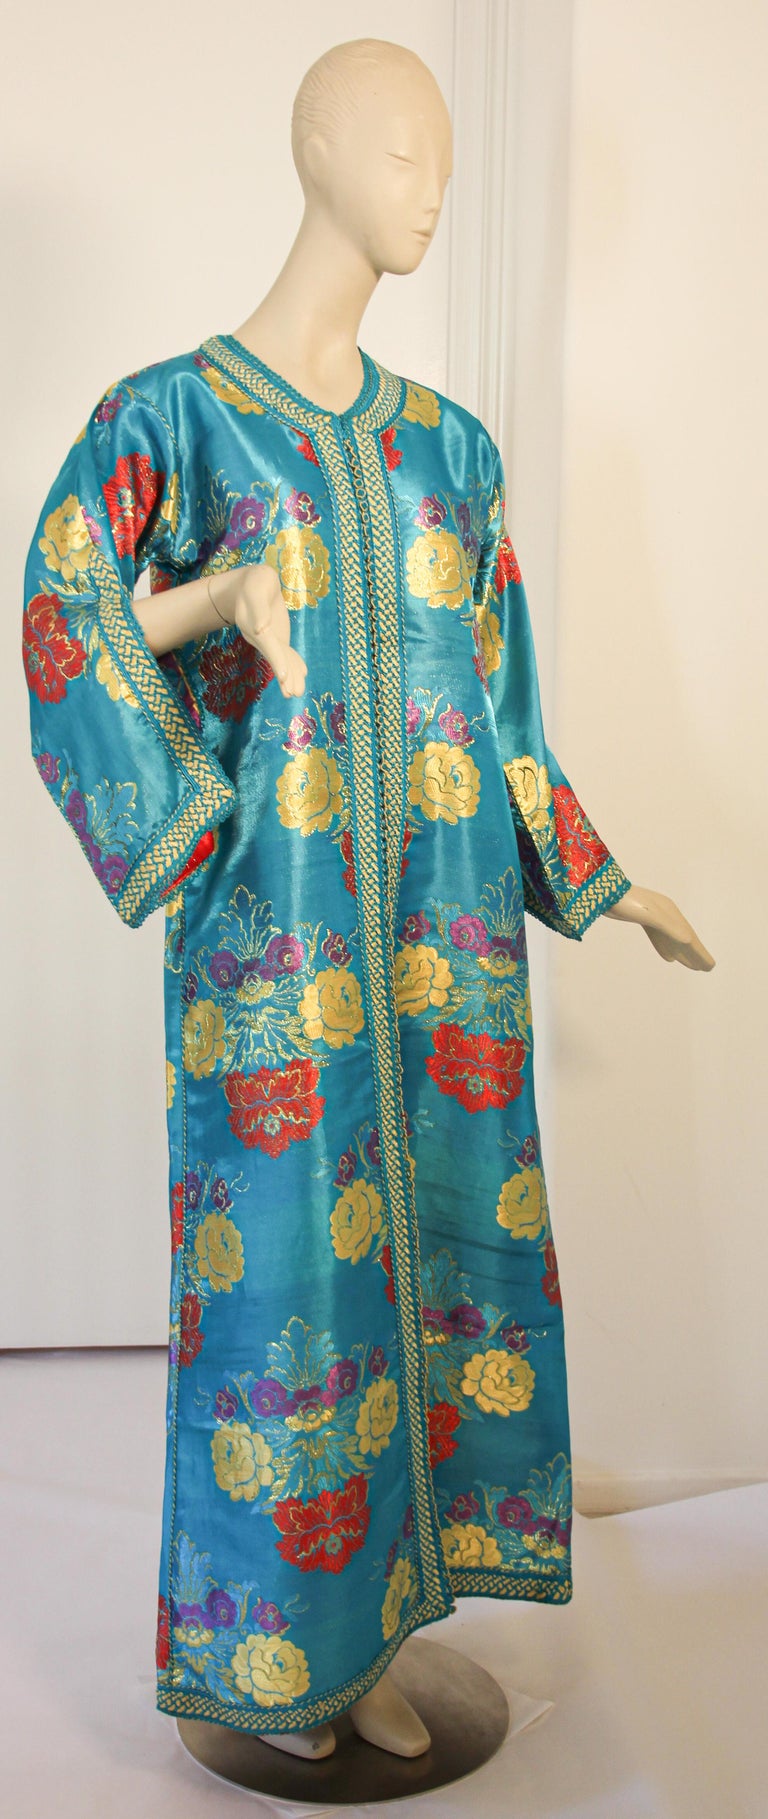 Elegant Moroccan caftan metallic blue floral brocade,
This is an exceptional example of Moroccan fashion design.
Handcrafted in Morocco and tailored for a relaxed fit with wide sleeves, it is made in the traditional form of a Moroccan caftan using